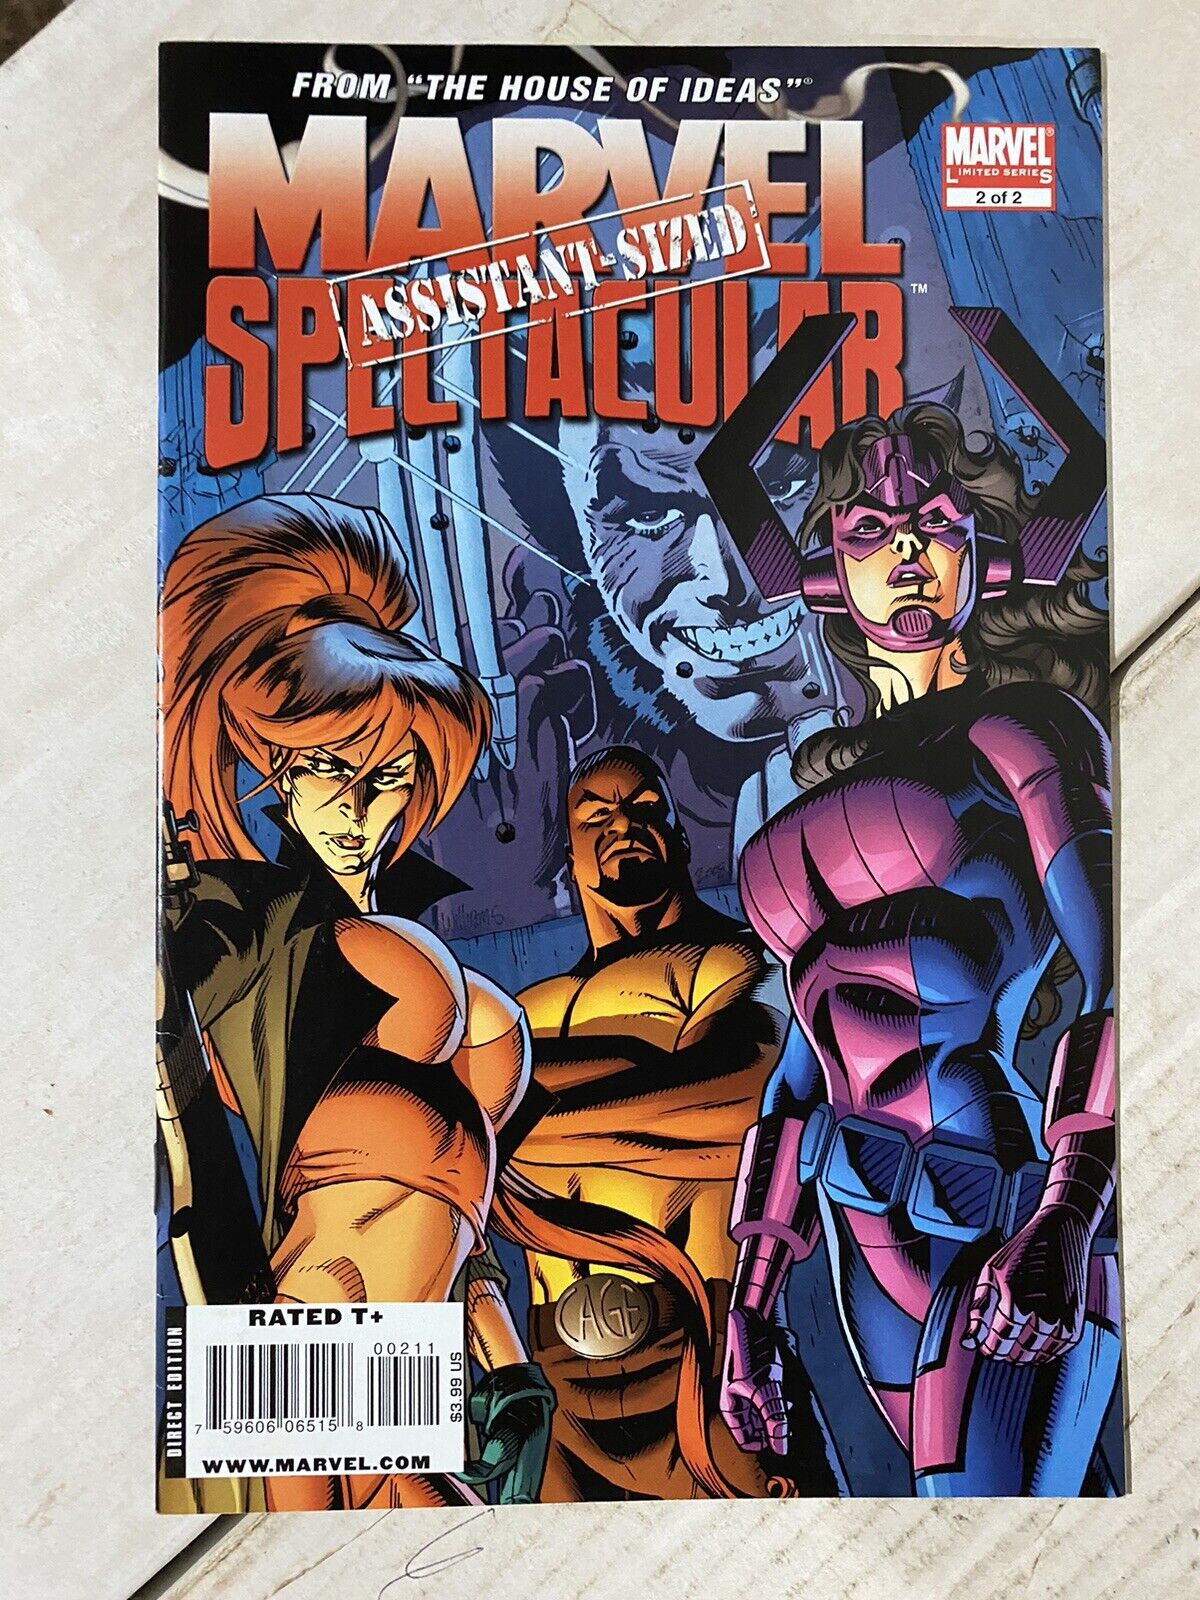 Marvel Assistant-Sized Spectacular 2 (2009) 1st Galacta Bloodstone VF/NM